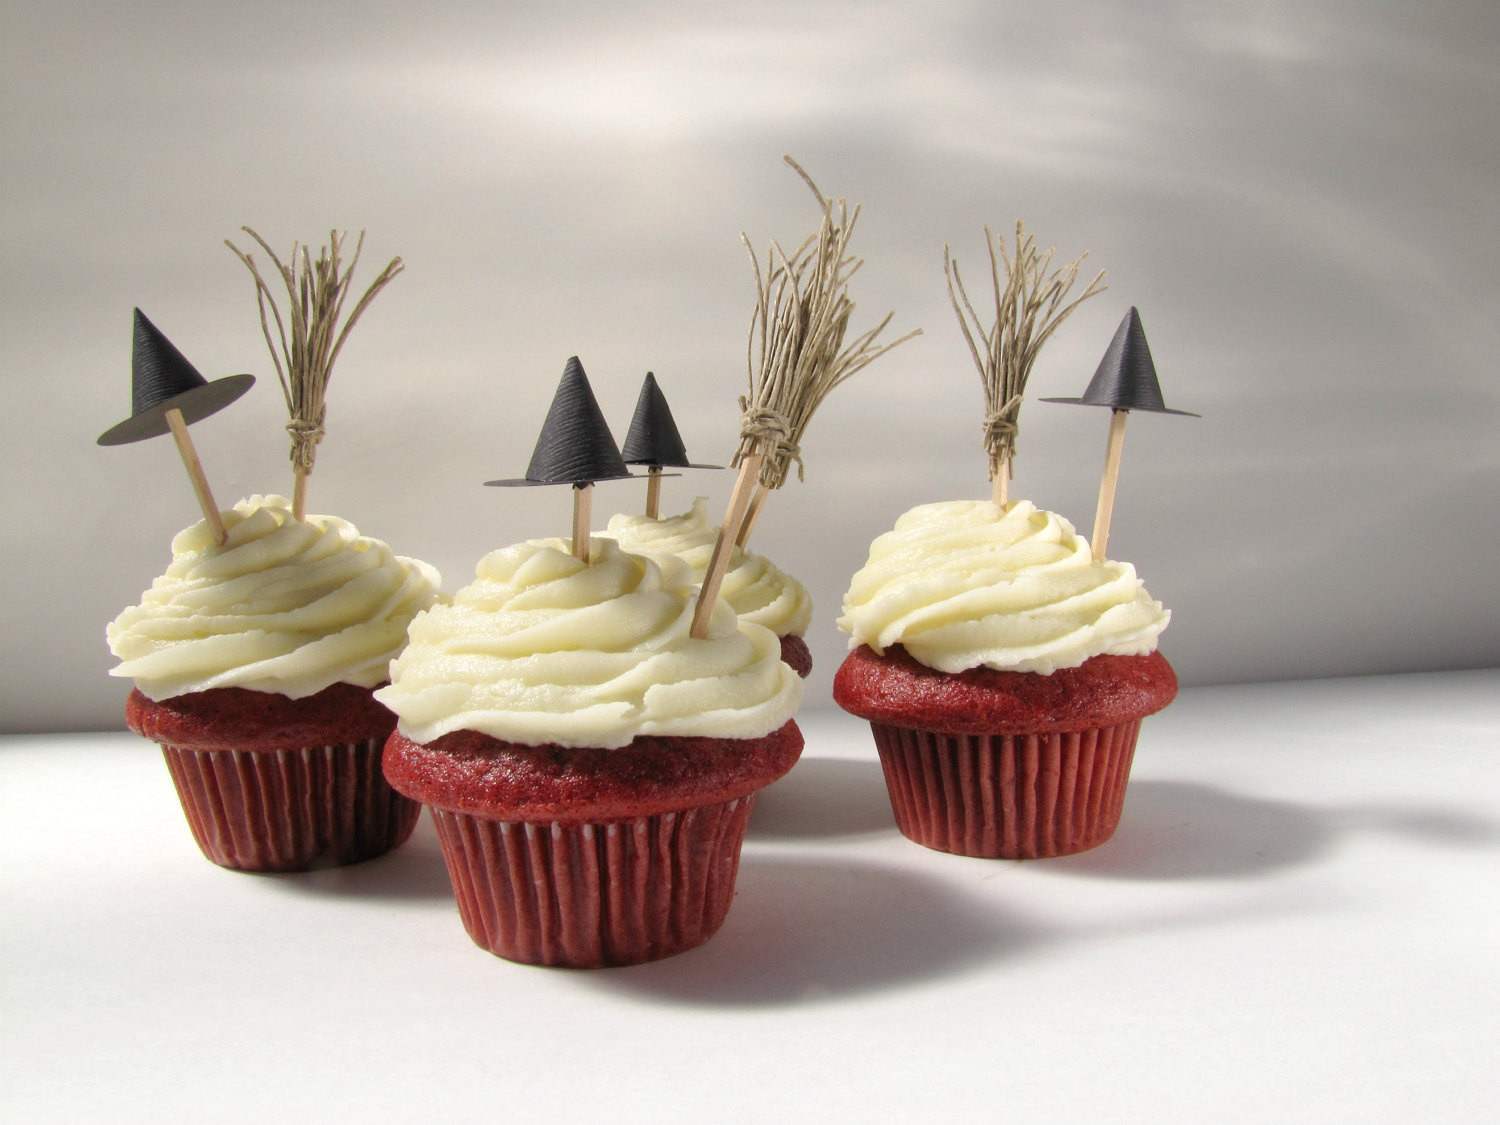 Halloween Cupcakes Toppers
 Halloween Cupcake Toppers Witch hats and brooms cupcake